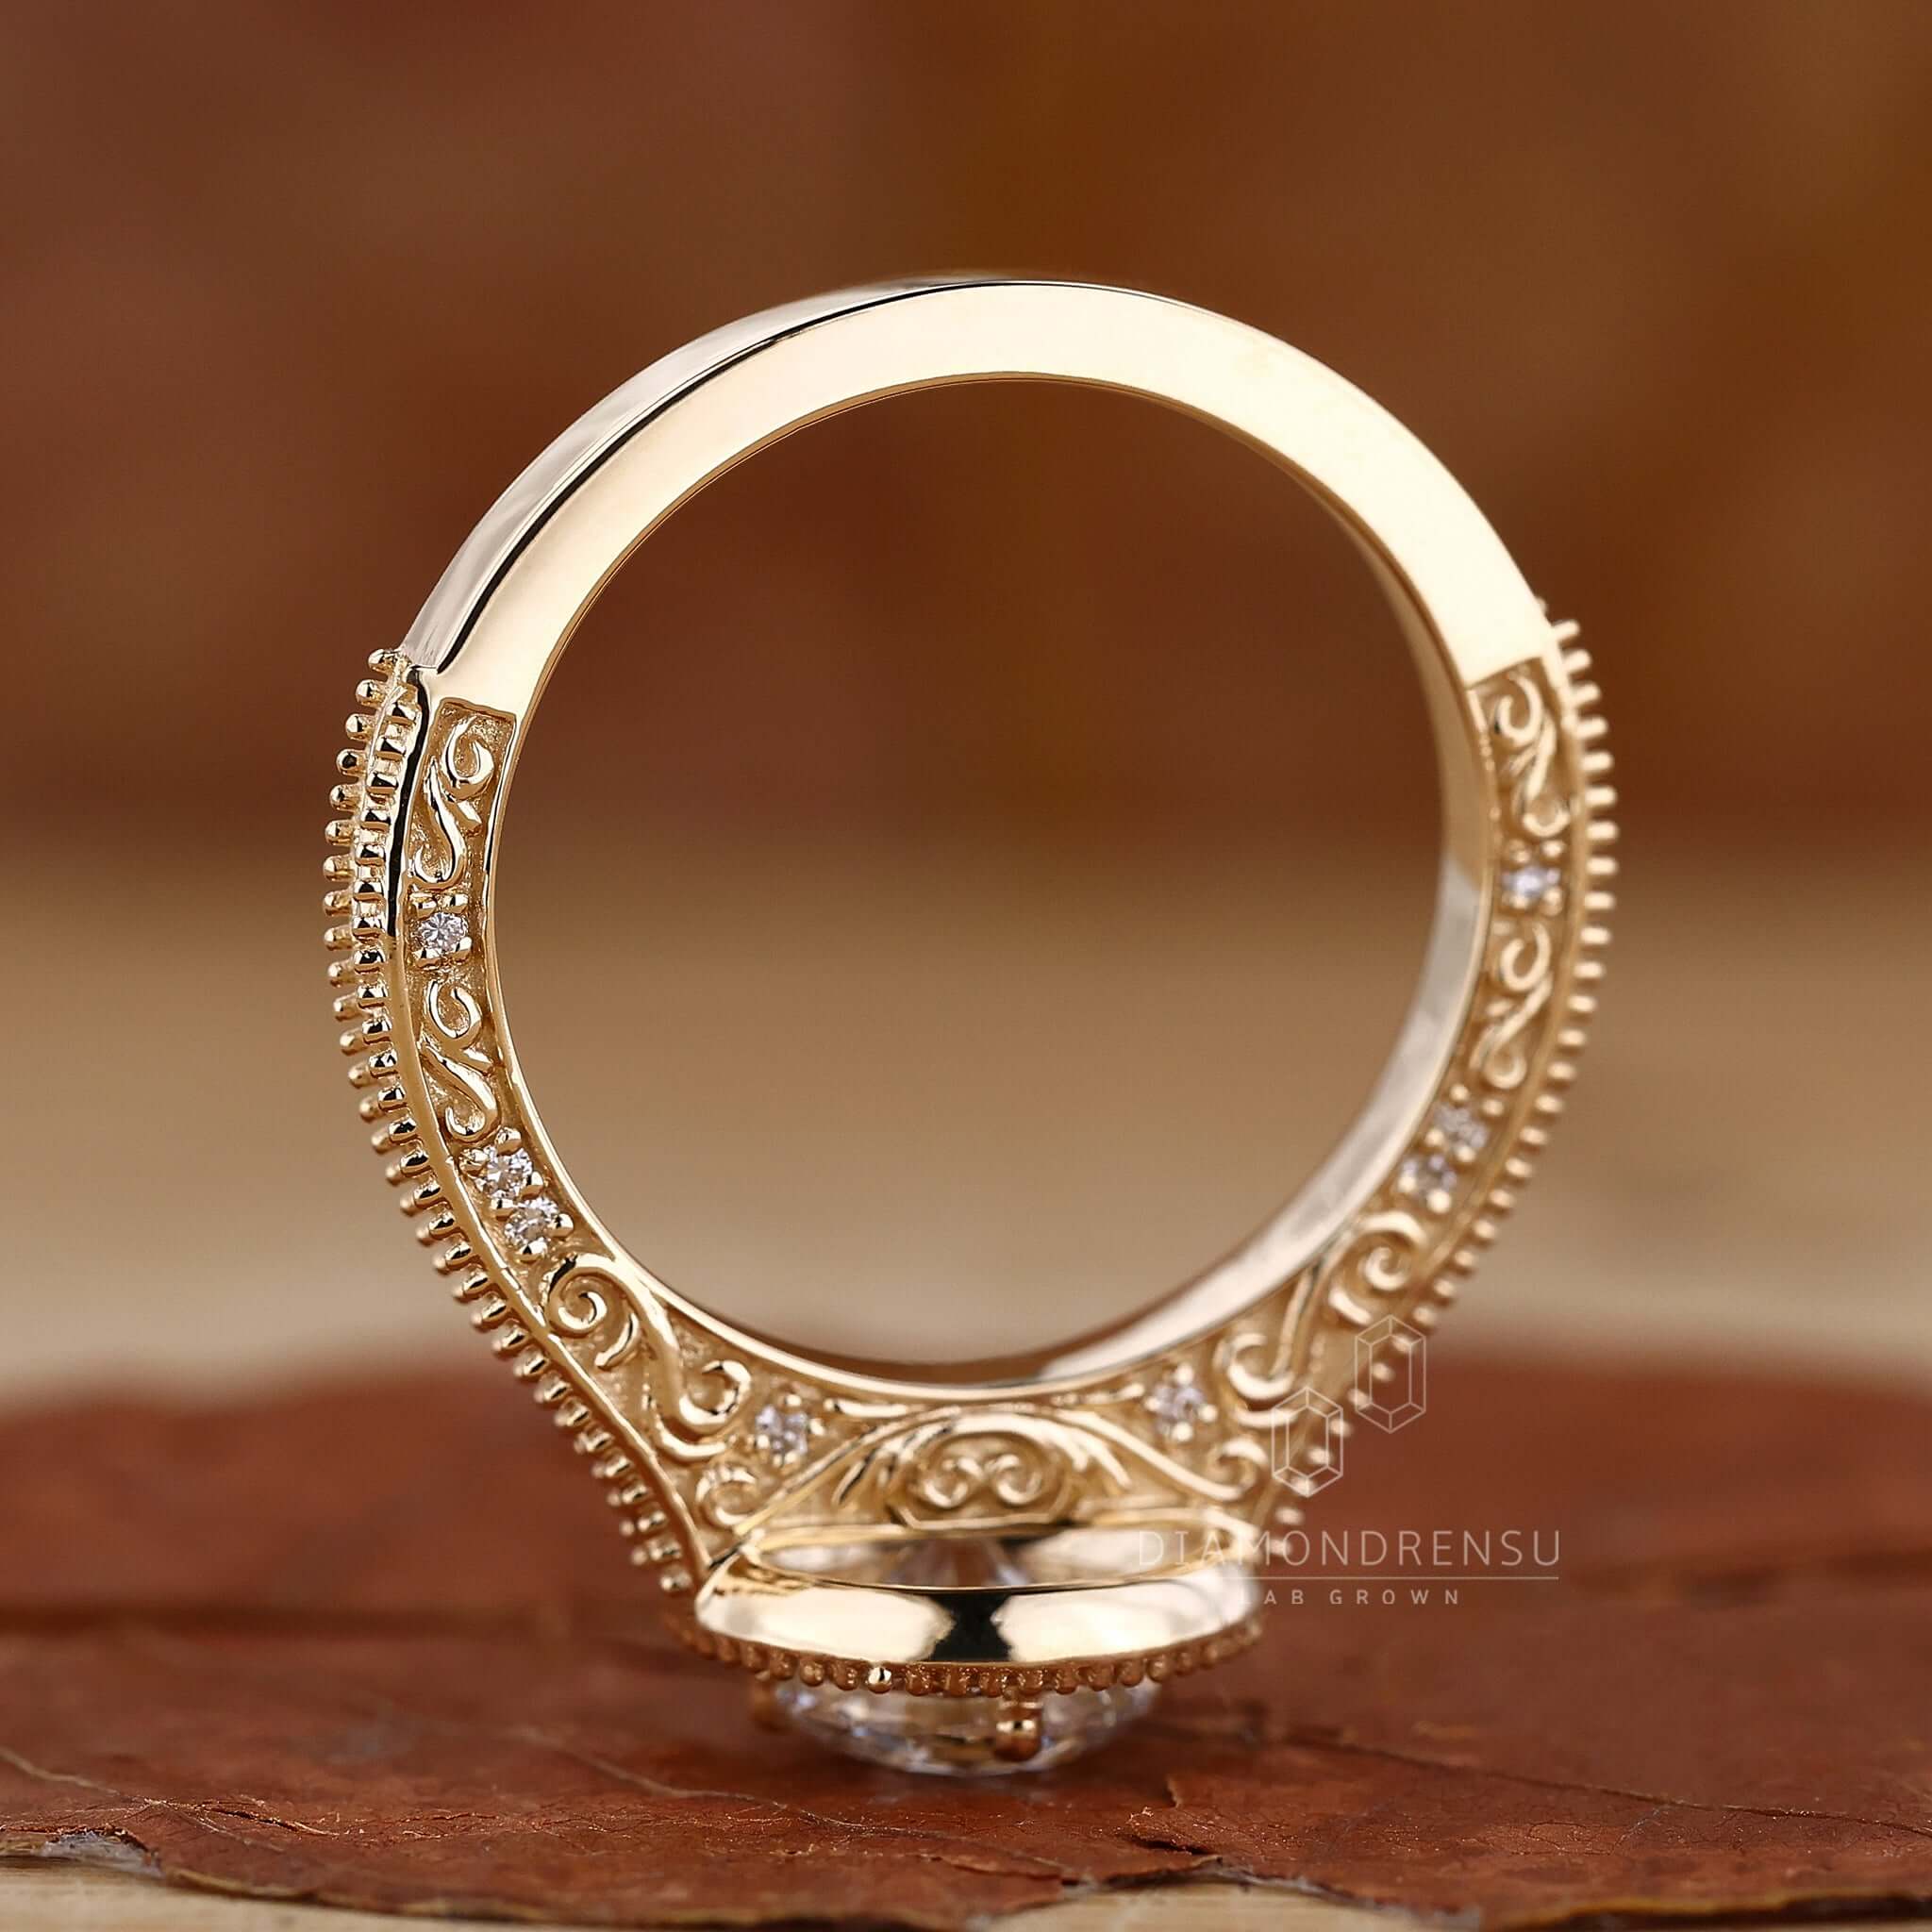 Glamorous halo pave ring setting in gold, featuring sparkling diamonds in a radiant halo design